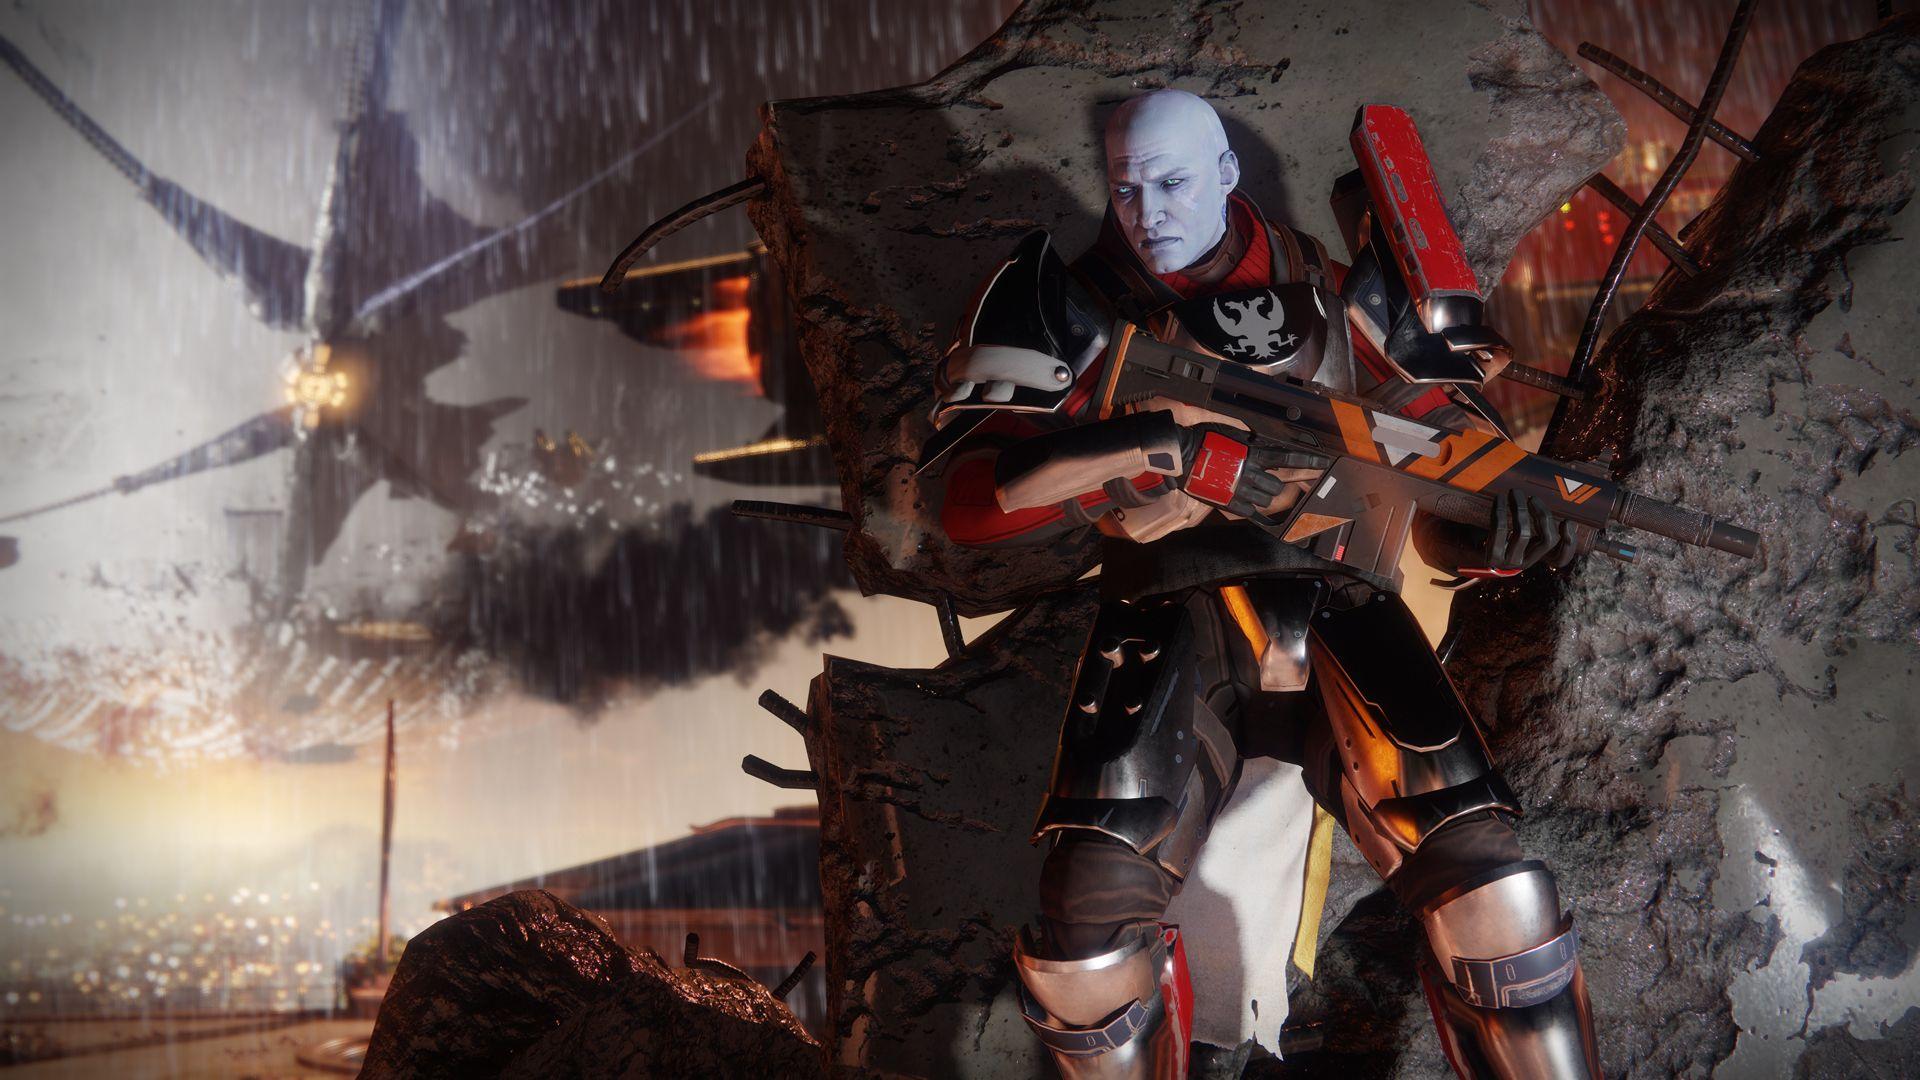 Destiny 2 Early Access Beta On PC Plagued With 'Saxophone' Error